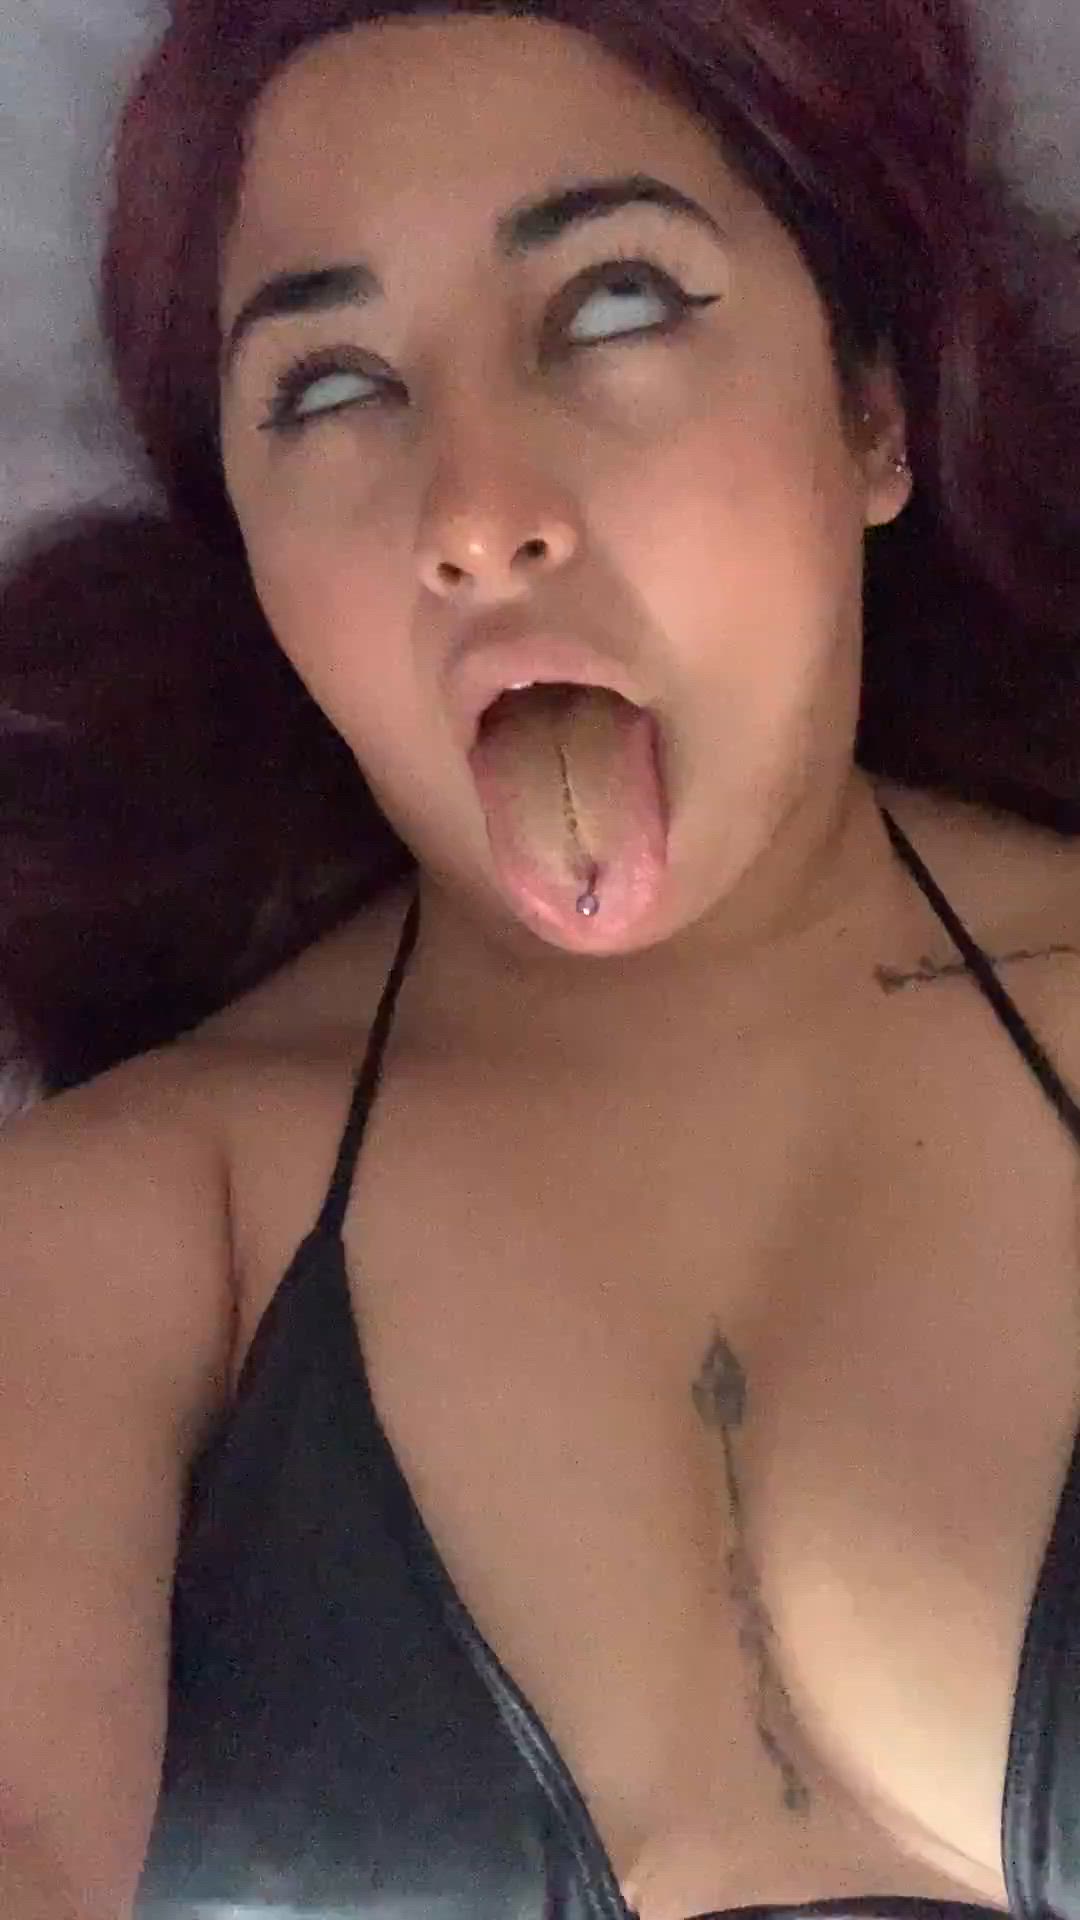 Tits porn video with onlyfans model merissa <strong>@poorlygabby</strong>